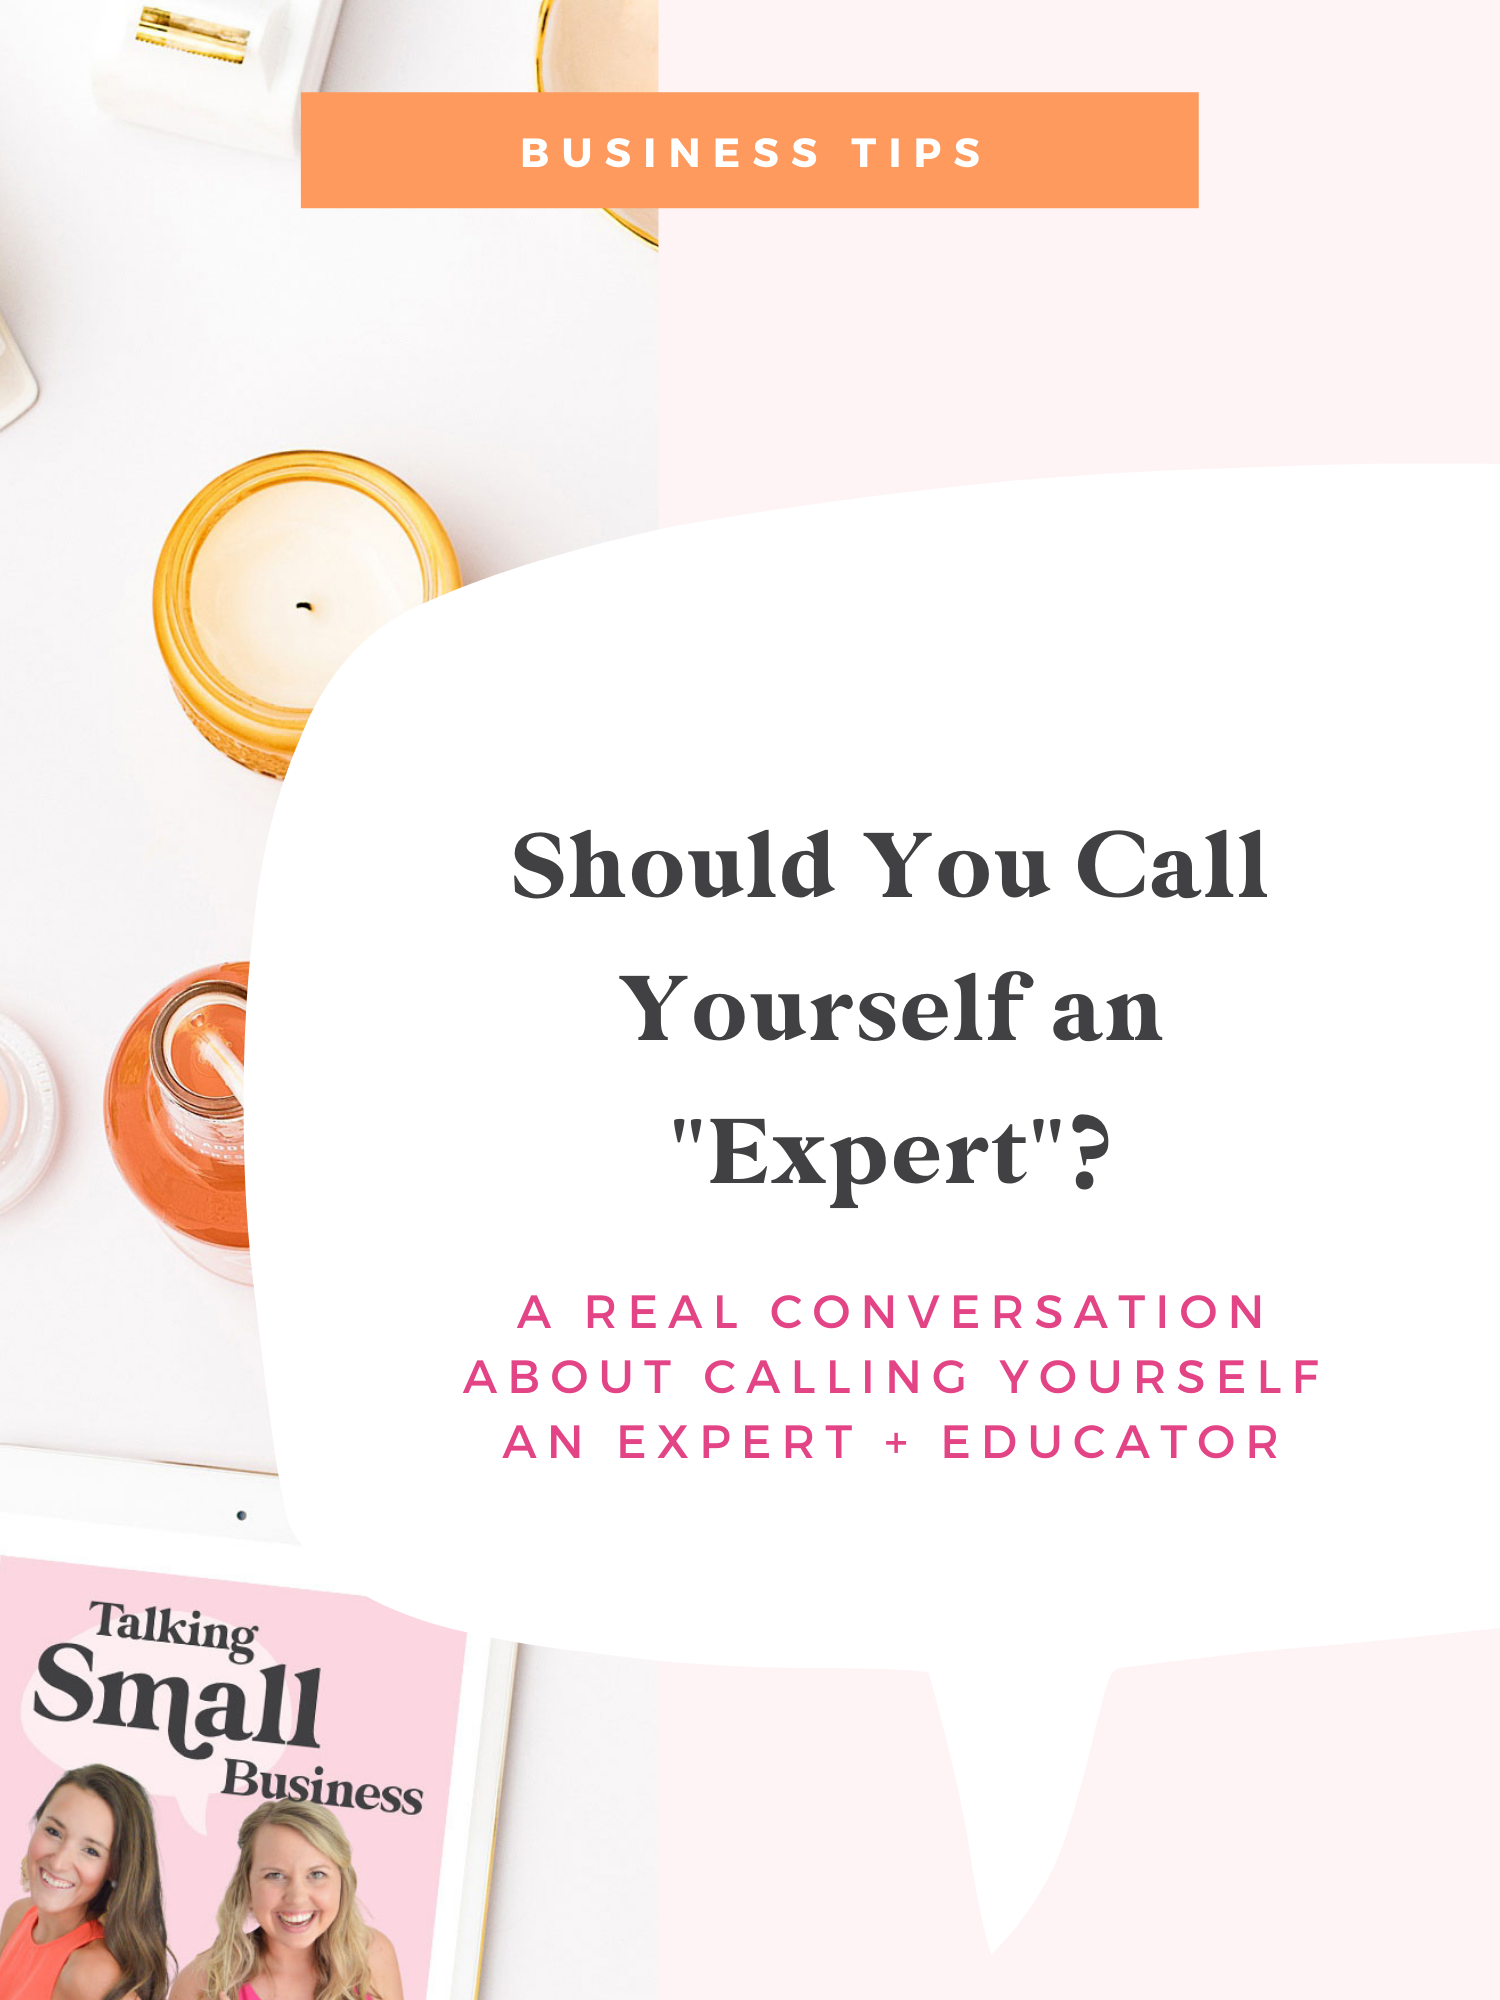 Should You Call Yourself an Expert?: A candid conversation about being an expert and educator as a business owner